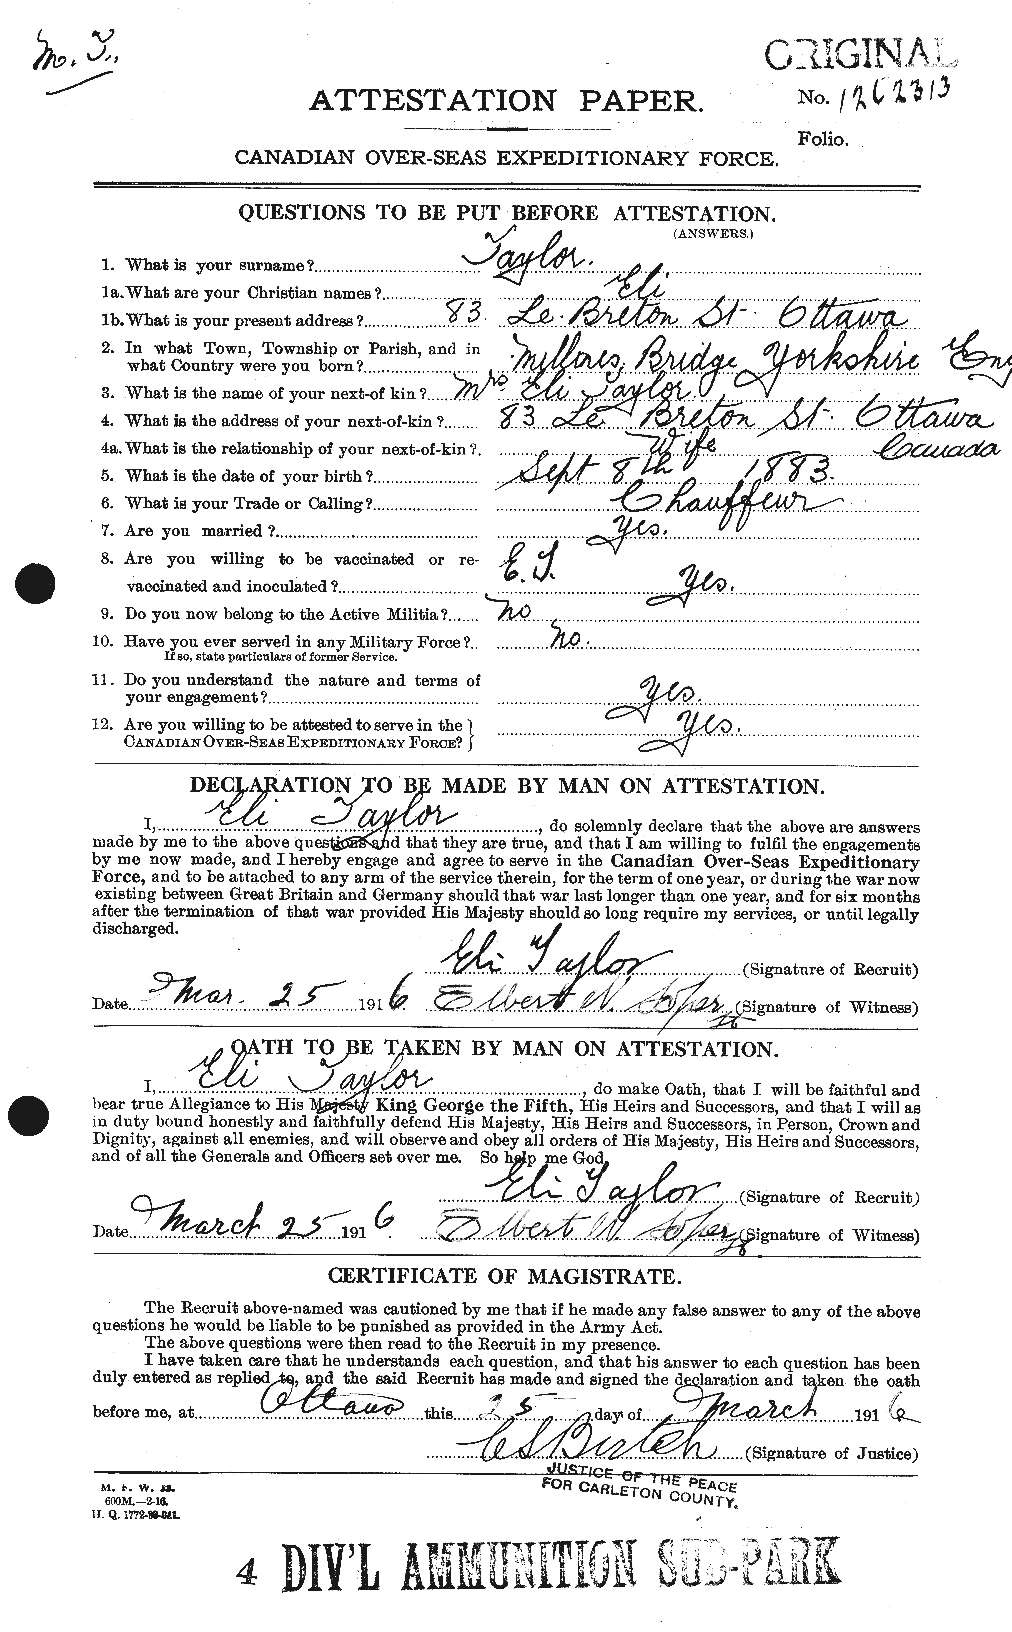 Personnel Records of the First World War - CEF 627346a